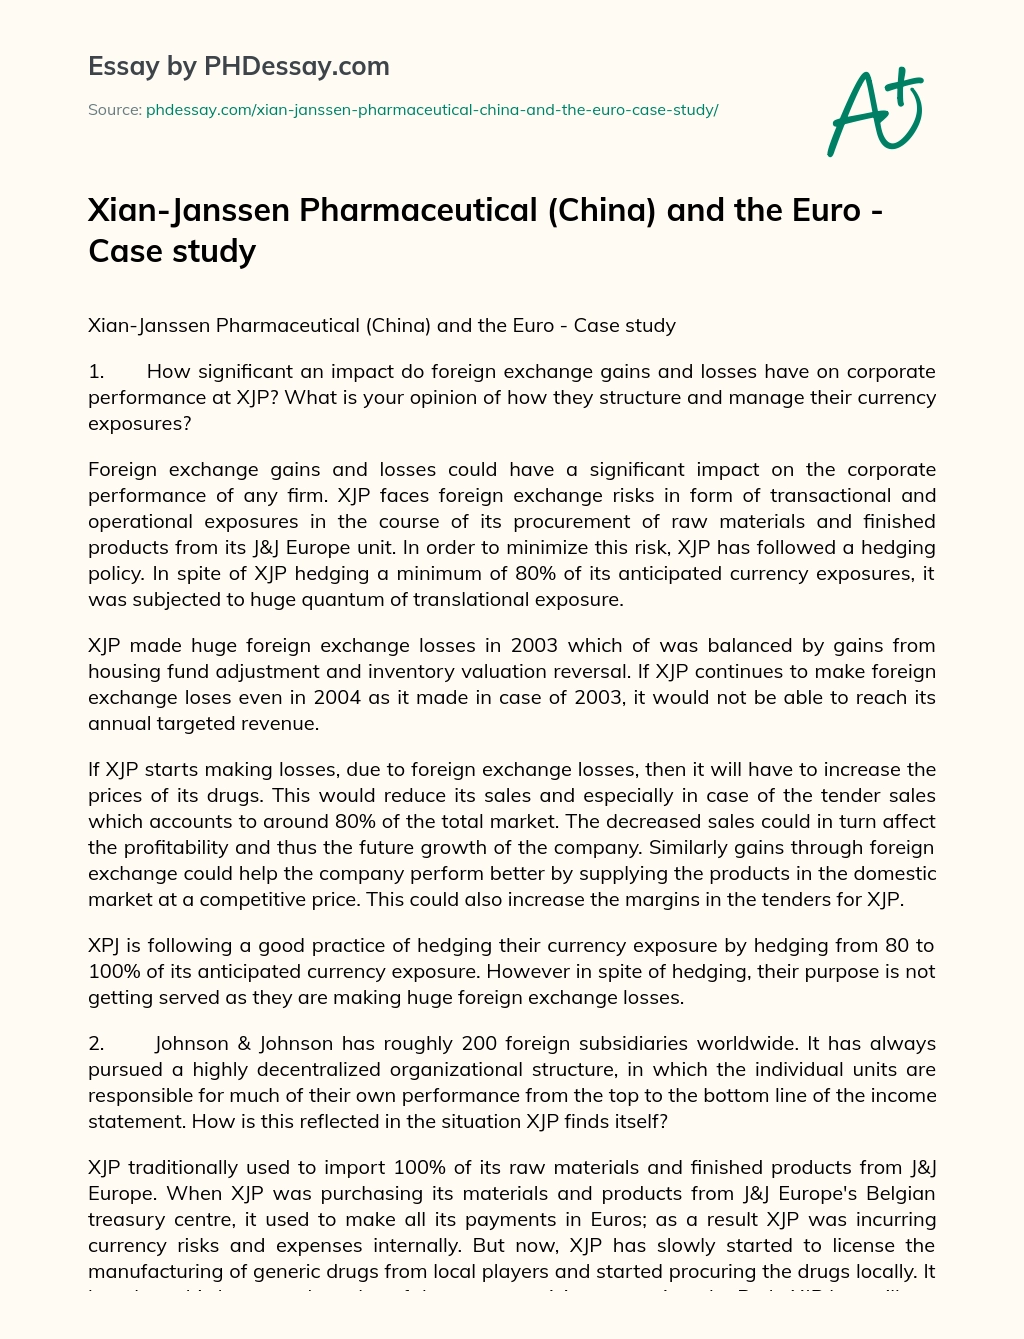 Xian-Janssen Pharmaceutical (China) and the Euro – Case study essay